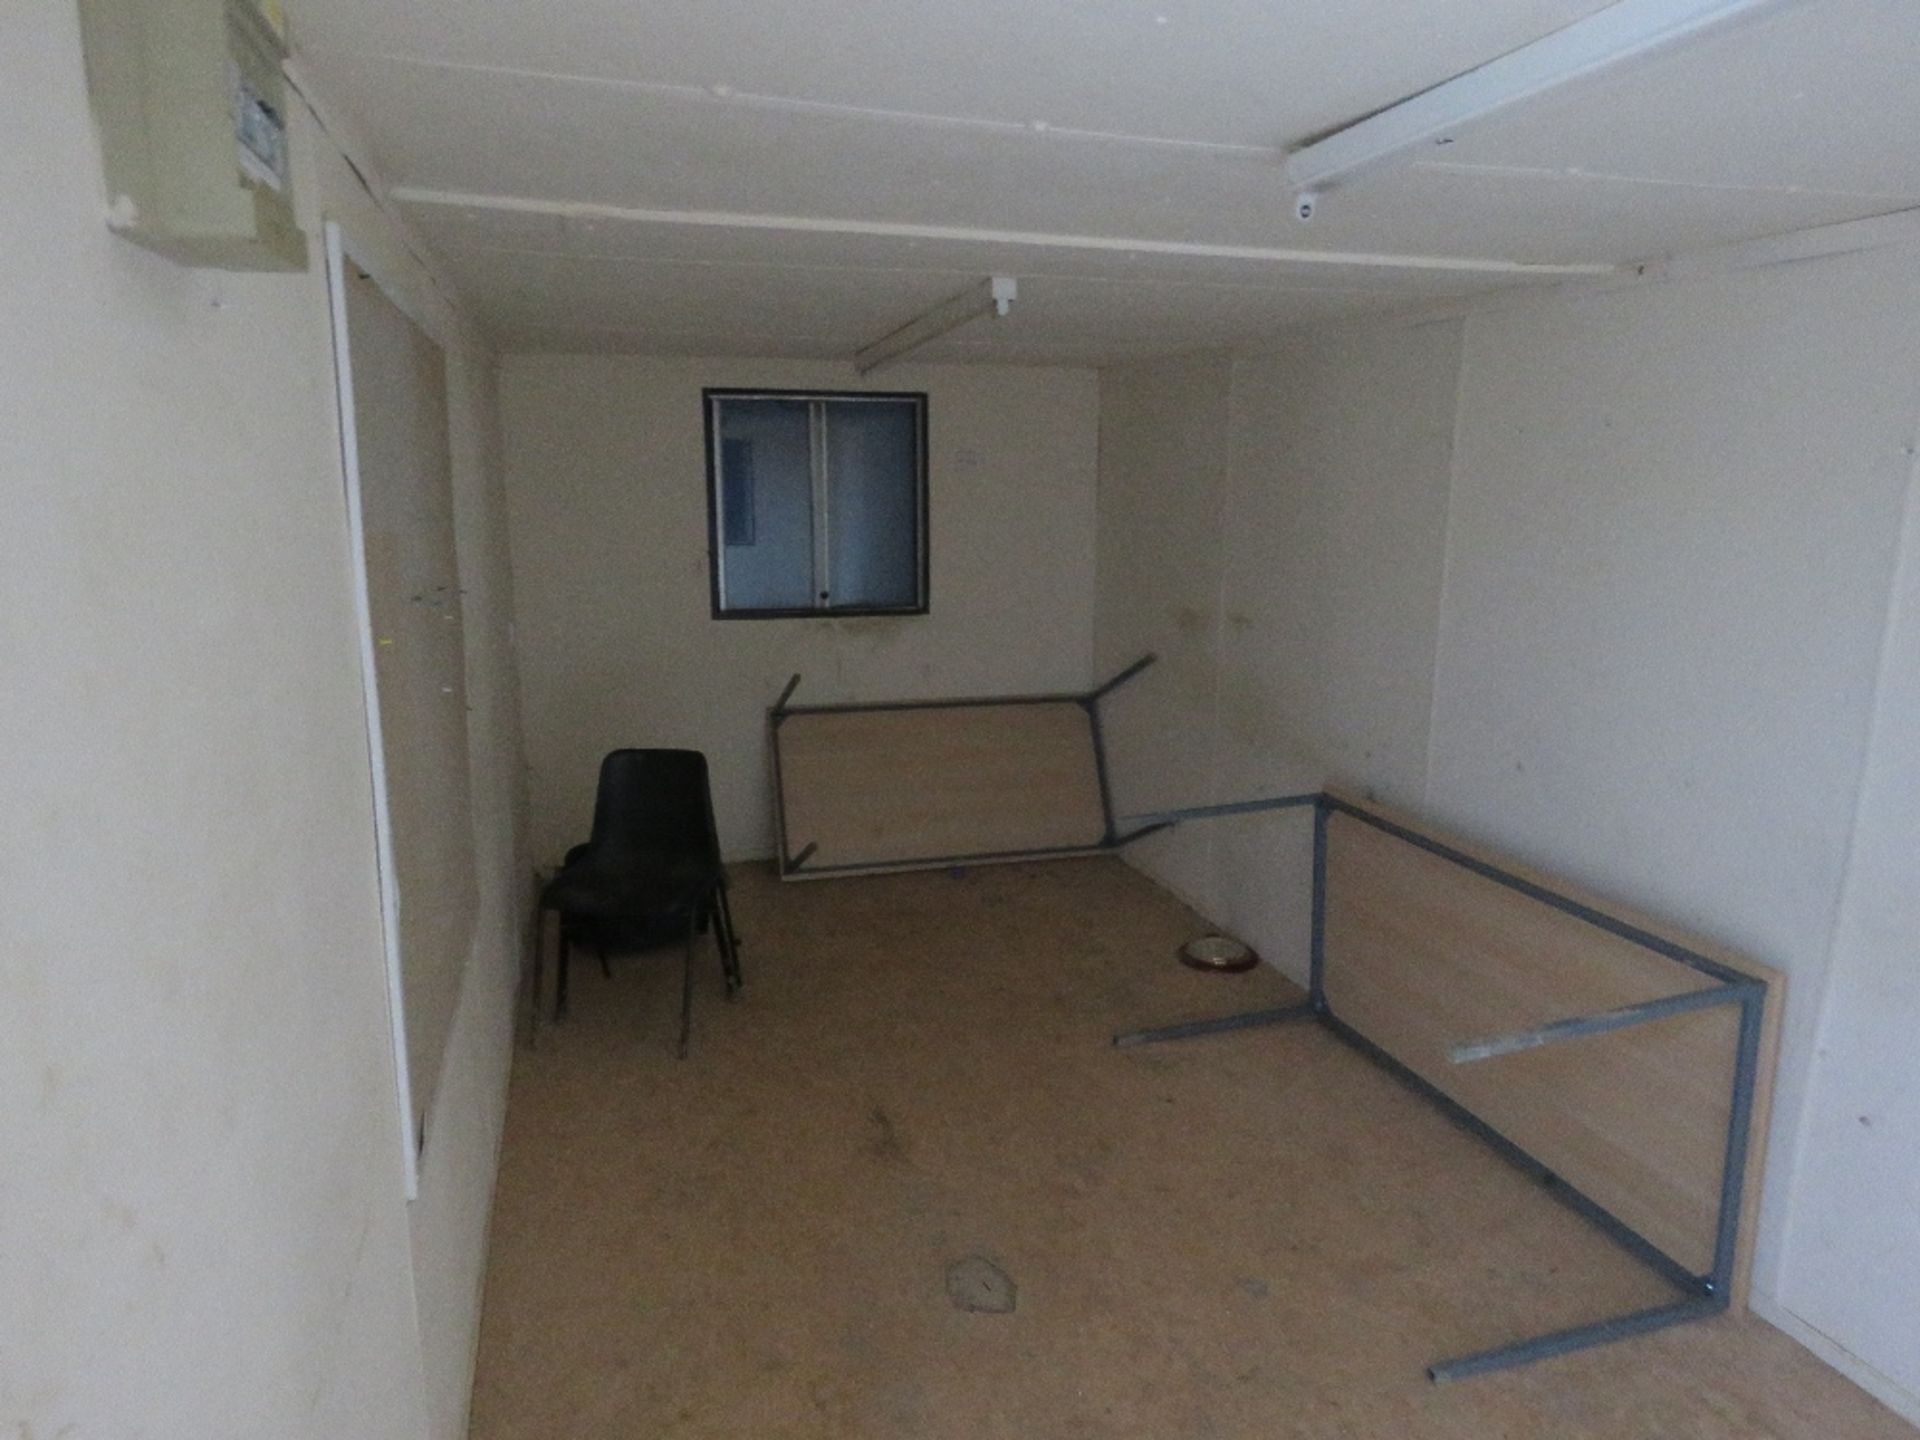 SECURE STEEL SITE OFFICE, OPEN PLAN LAYOUT. 20FT LENGTH X 9FT WIDTH APPROX. WITH KEYS, UNLOCKED. SO - Image 5 of 7